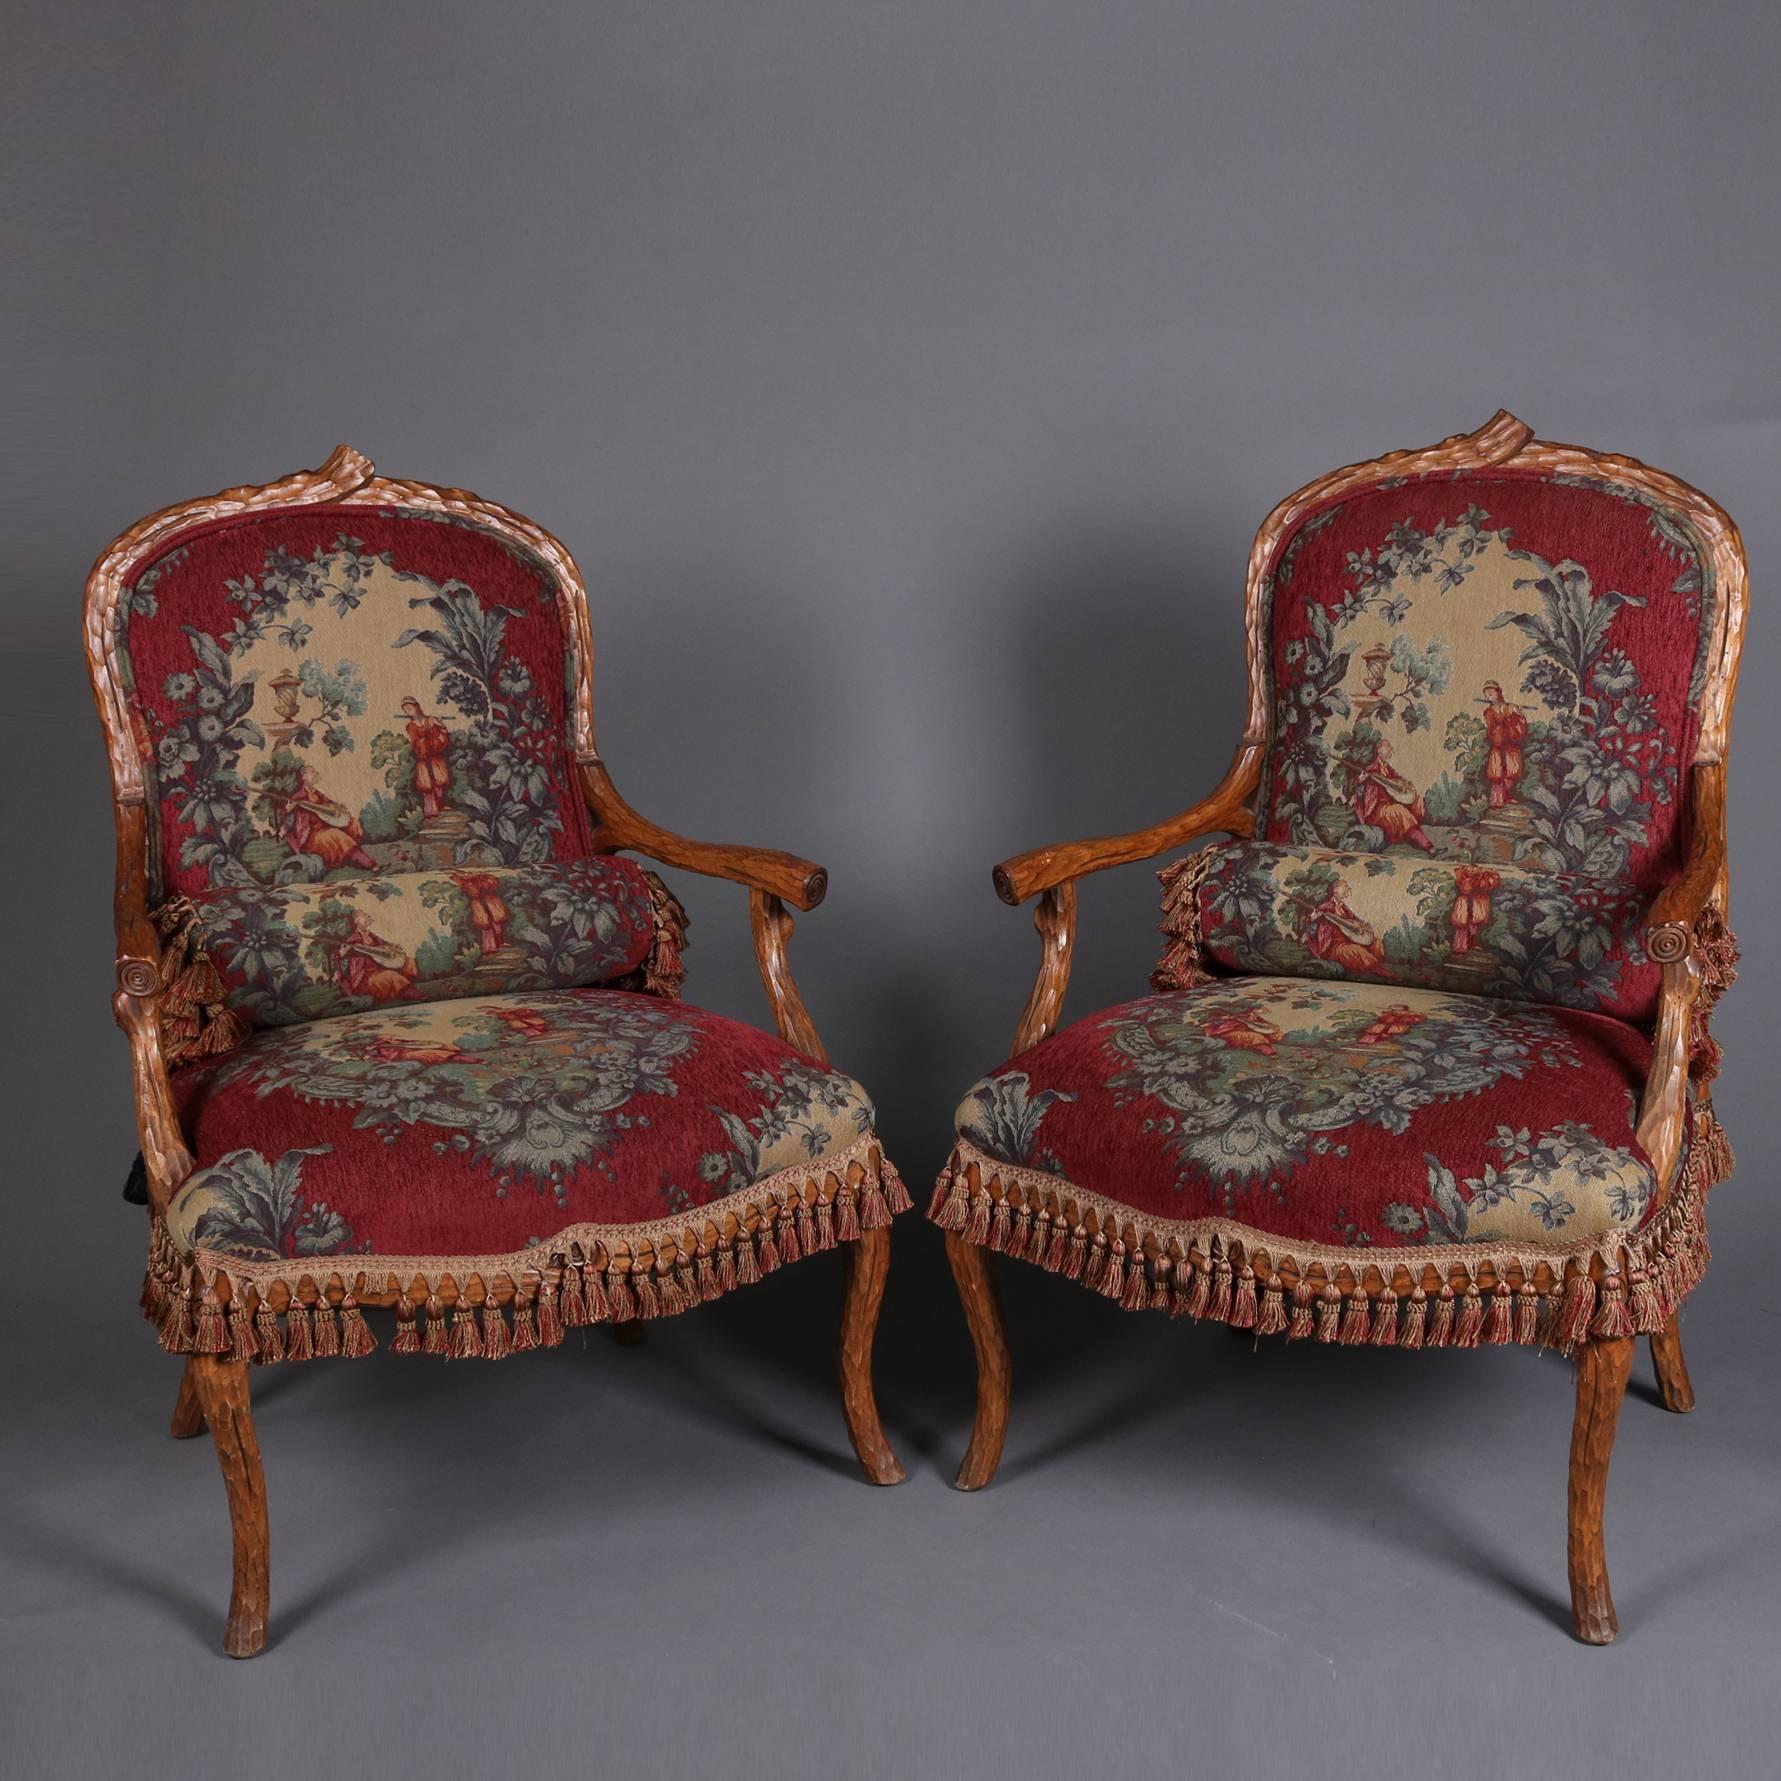 Pair of antique armchairs feature carved walnut stick form frame with tapestry upholstered seats and backs, tassel trimming, 19th century

Measures: 41